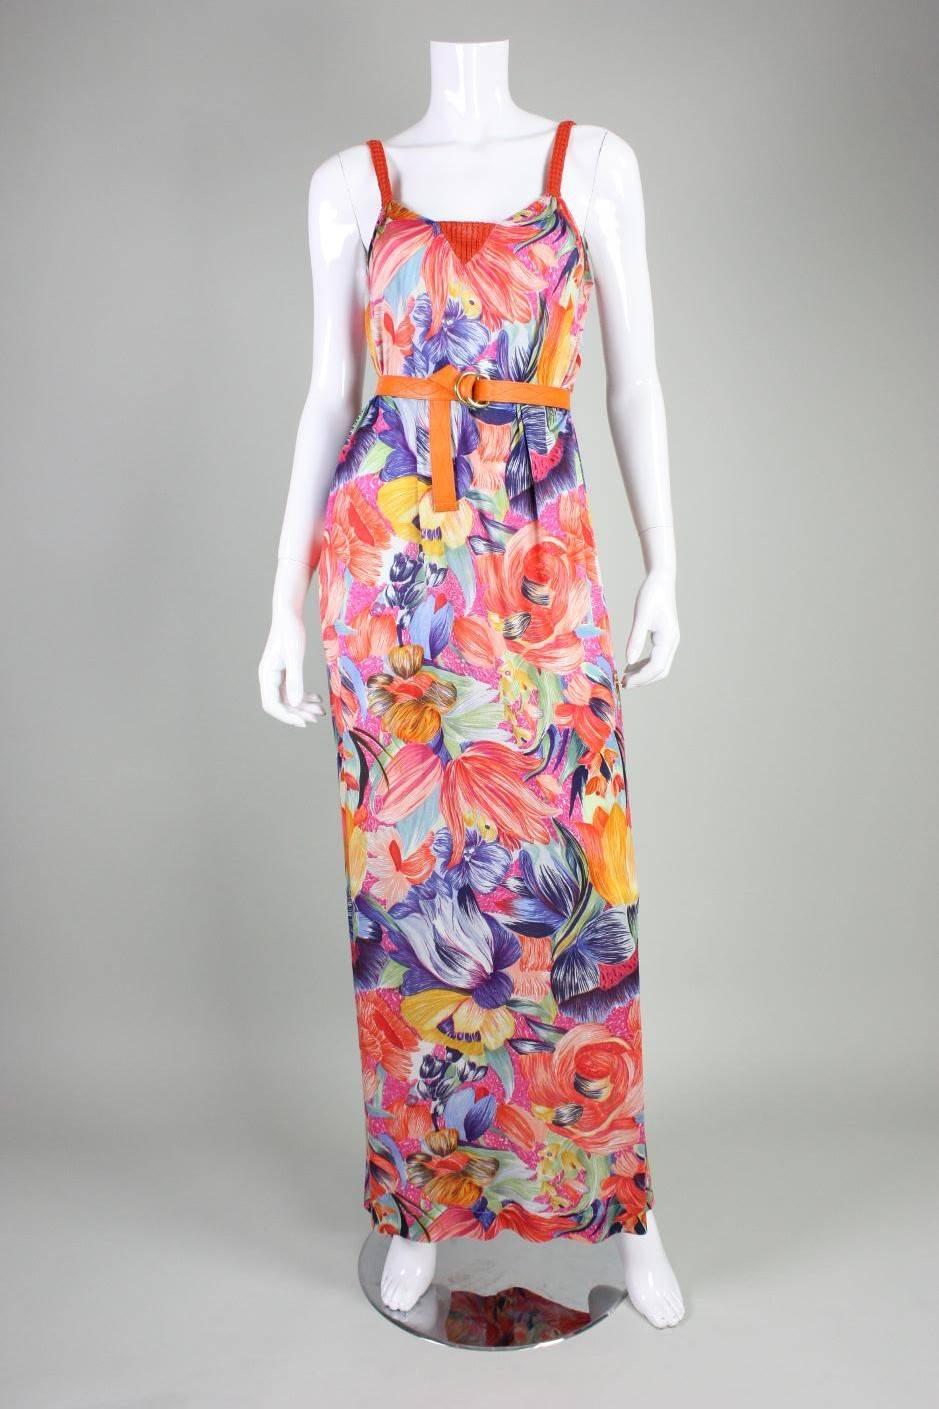 Vintage gown from Missoni dates to the 1970's and retailed at Apropos boutique.  It is made of a soft silk jersey with an active floral print in bold colors.  Orange knit straps and center front insert.  Center back slit at hem.  Unlined. No